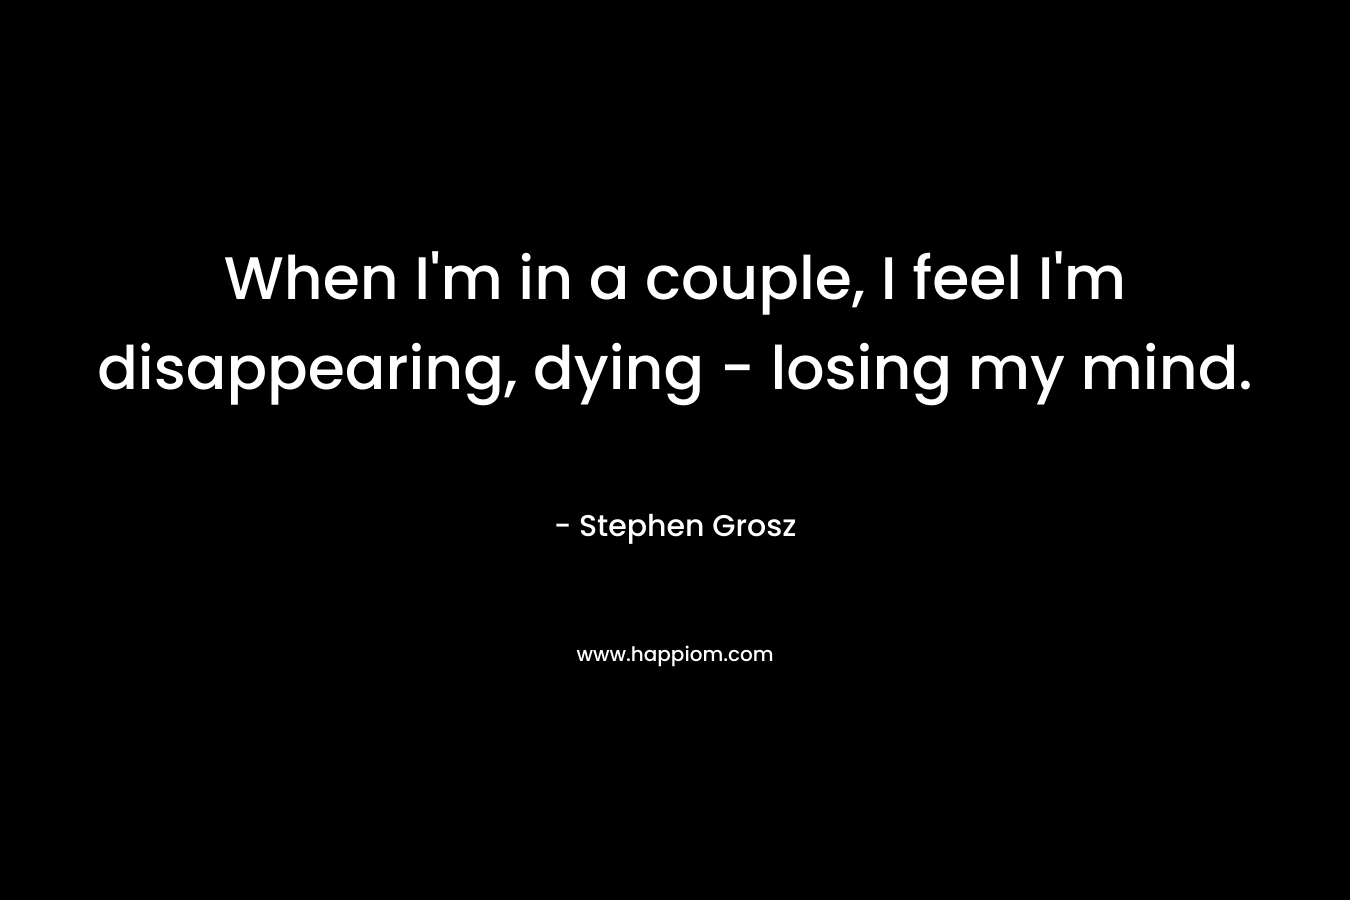 When I’m in a couple, I feel I’m disappearing, dying – losing my mind. – Stephen Grosz